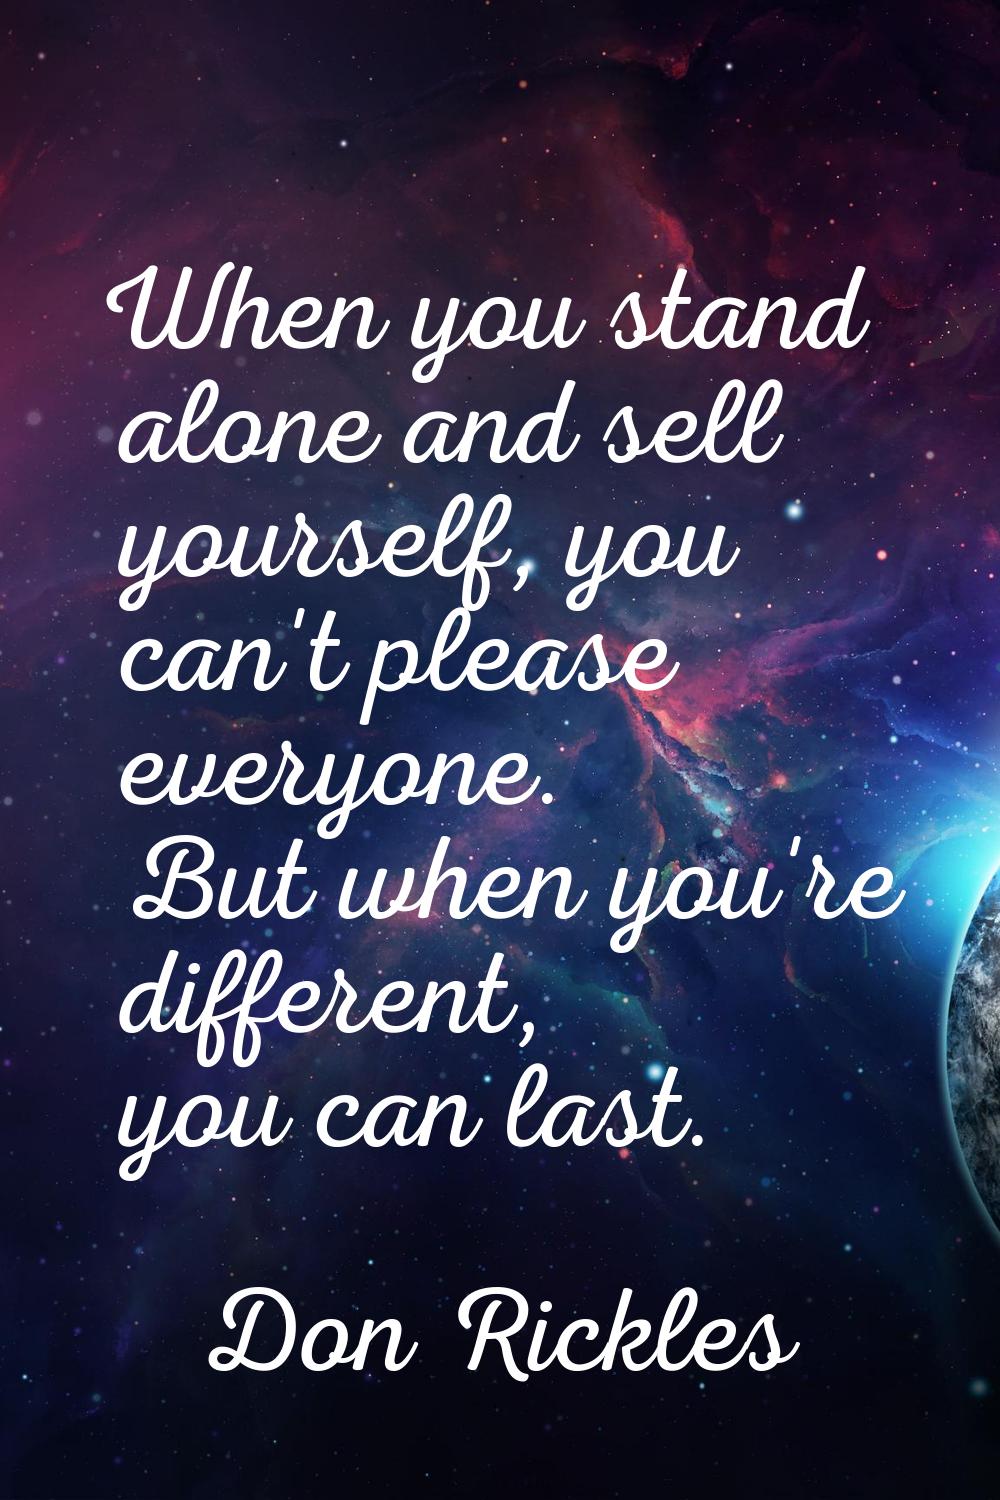 When you stand alone and sell yourself, you can't please everyone. But when you're different, you c